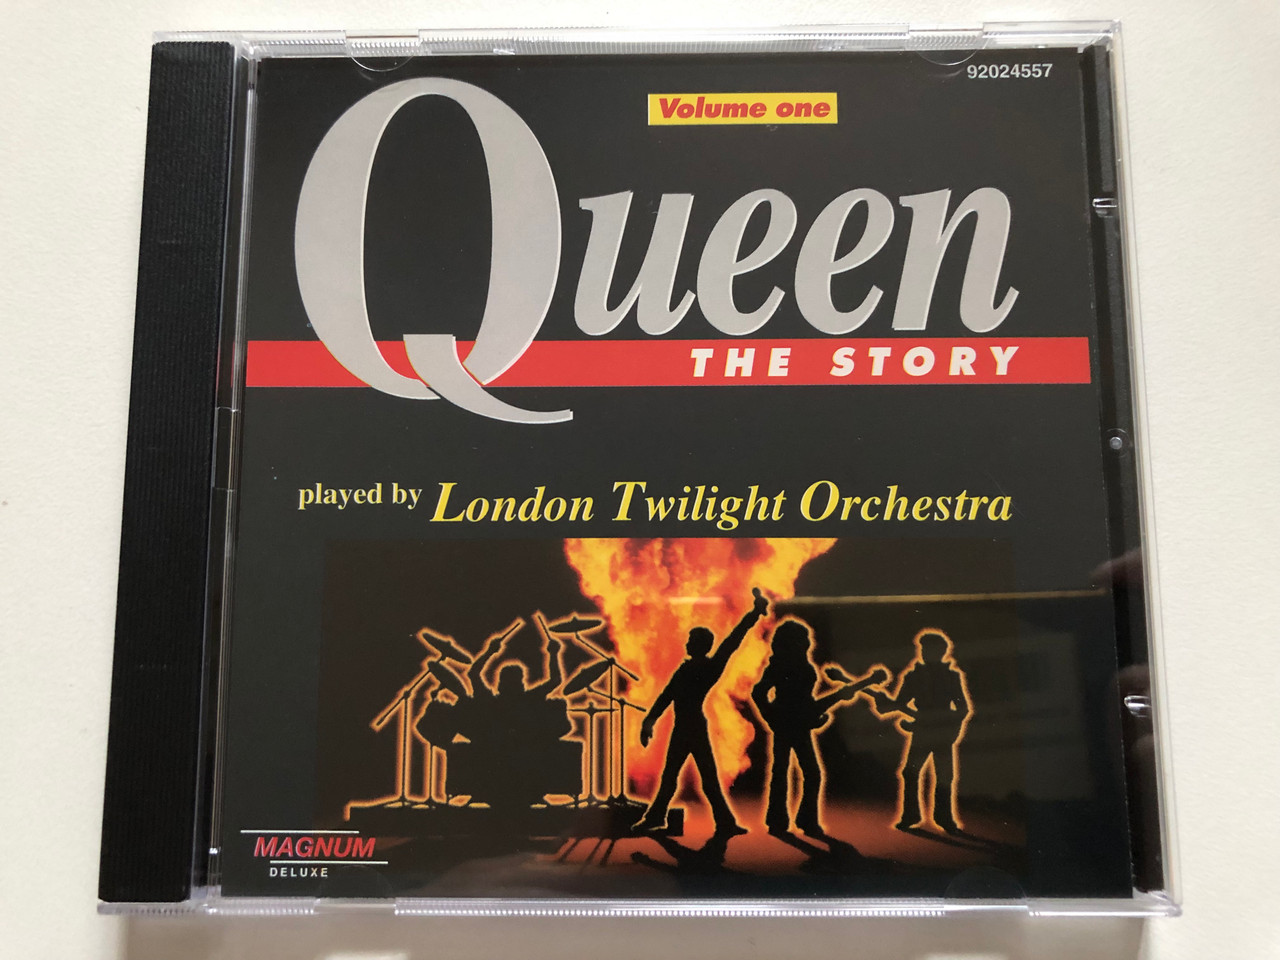 https://cdn10.bigcommerce.com/s-62bdpkt7pb/products/0/images/309923/Queen_-_The_Story_Volume_One_-_Played_By_London_Twilight_Orchestra_Magnum_Deluxe_Audio_CD_92024557_1__17755.1699298428.1280.1280.JPG?c=2